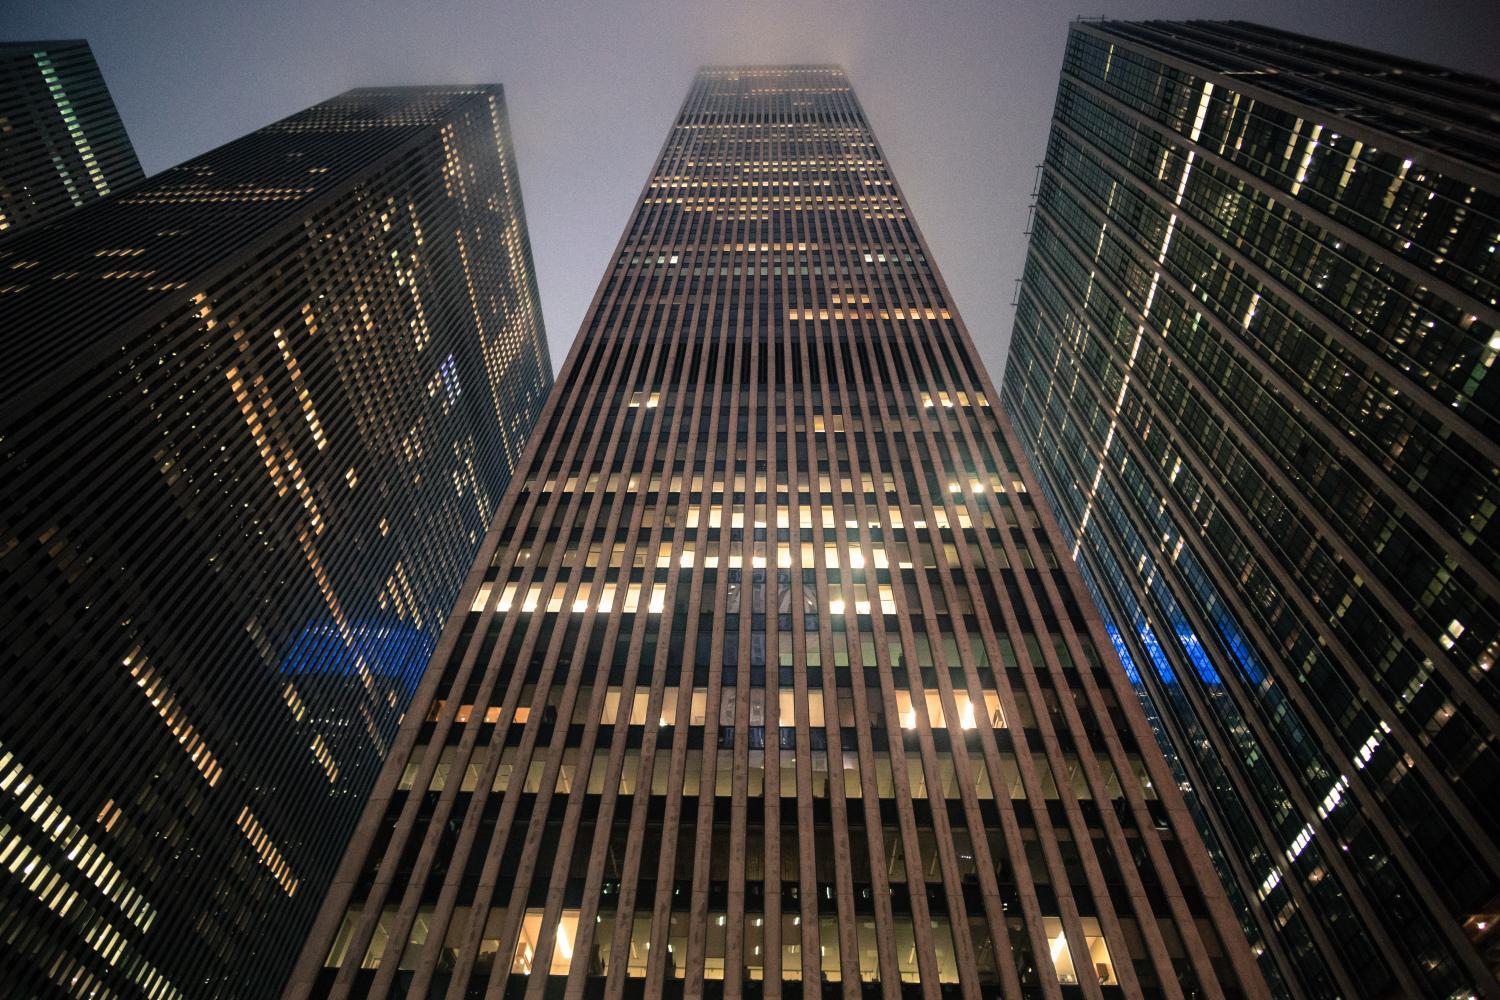 The immense man-made buildings just outside of Times Square in New York, New York serve as an ominous reminder of the structures that have replaced our worlds natural and balanced wildernesses. - Photo by Jason Lewis